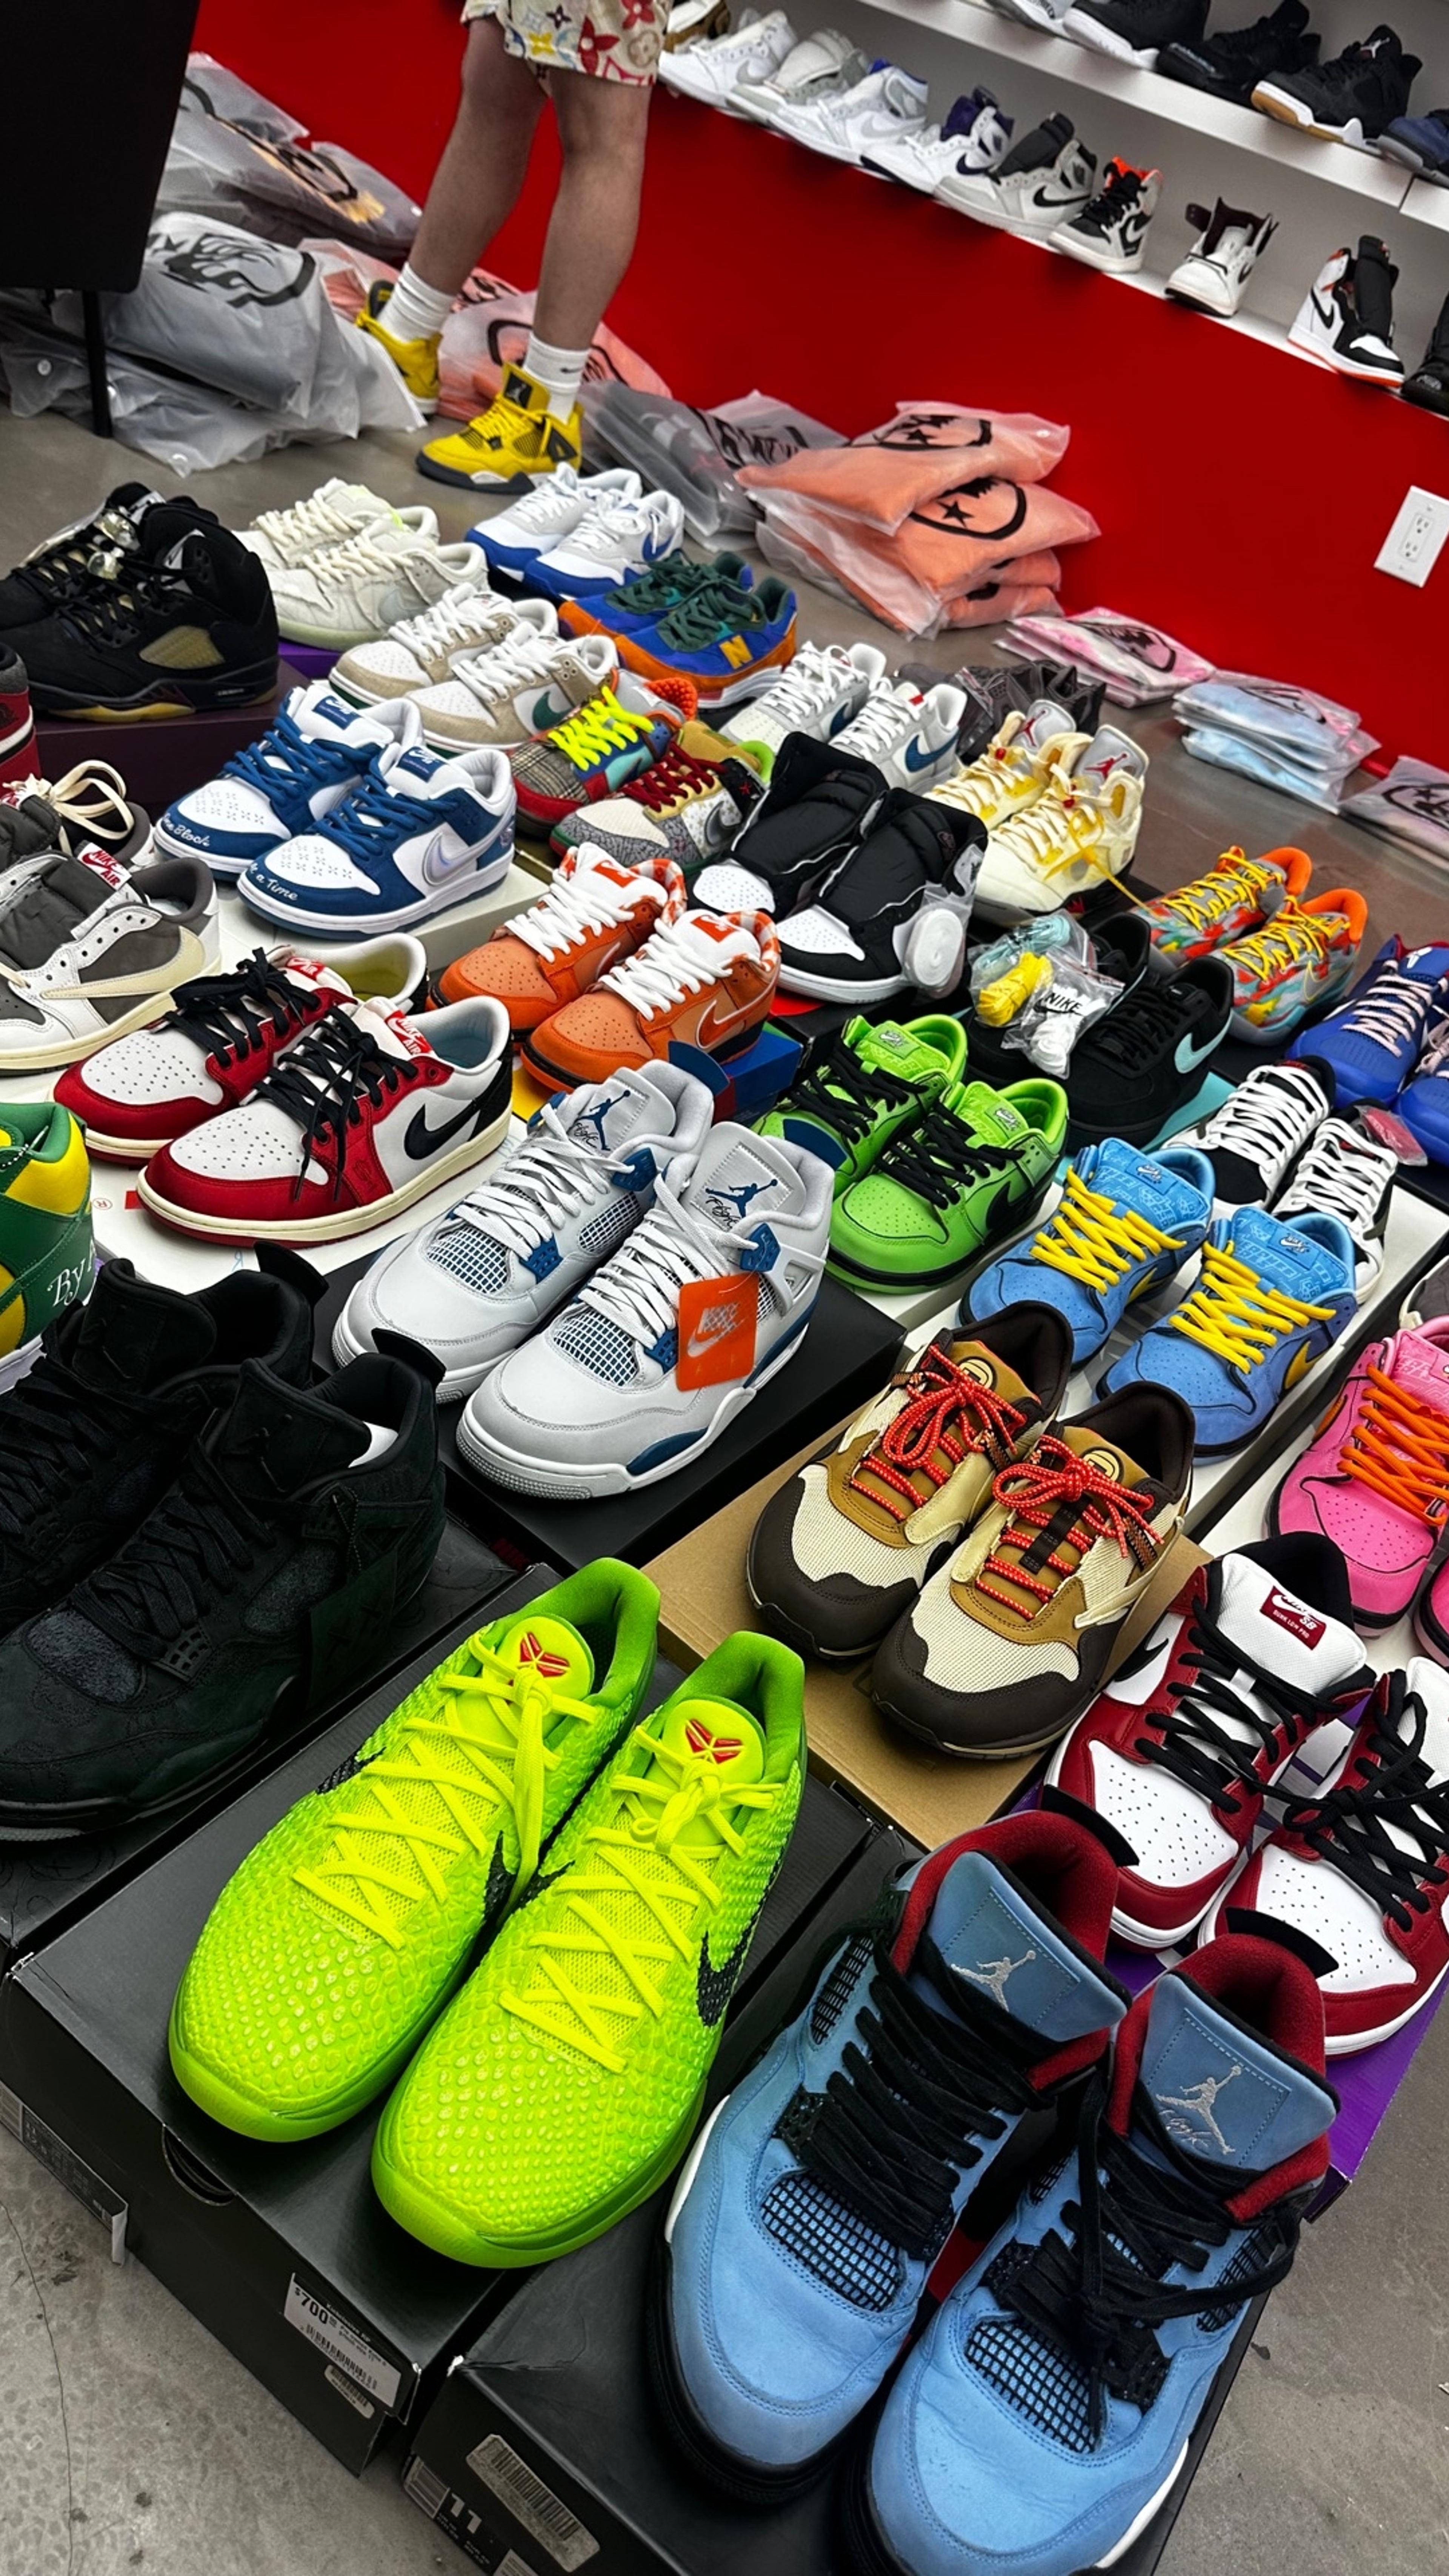 Preview image for the show titled "Quick Sneakers $1 auctions! EVERYTHING MUST GO! " at April 30, 2024